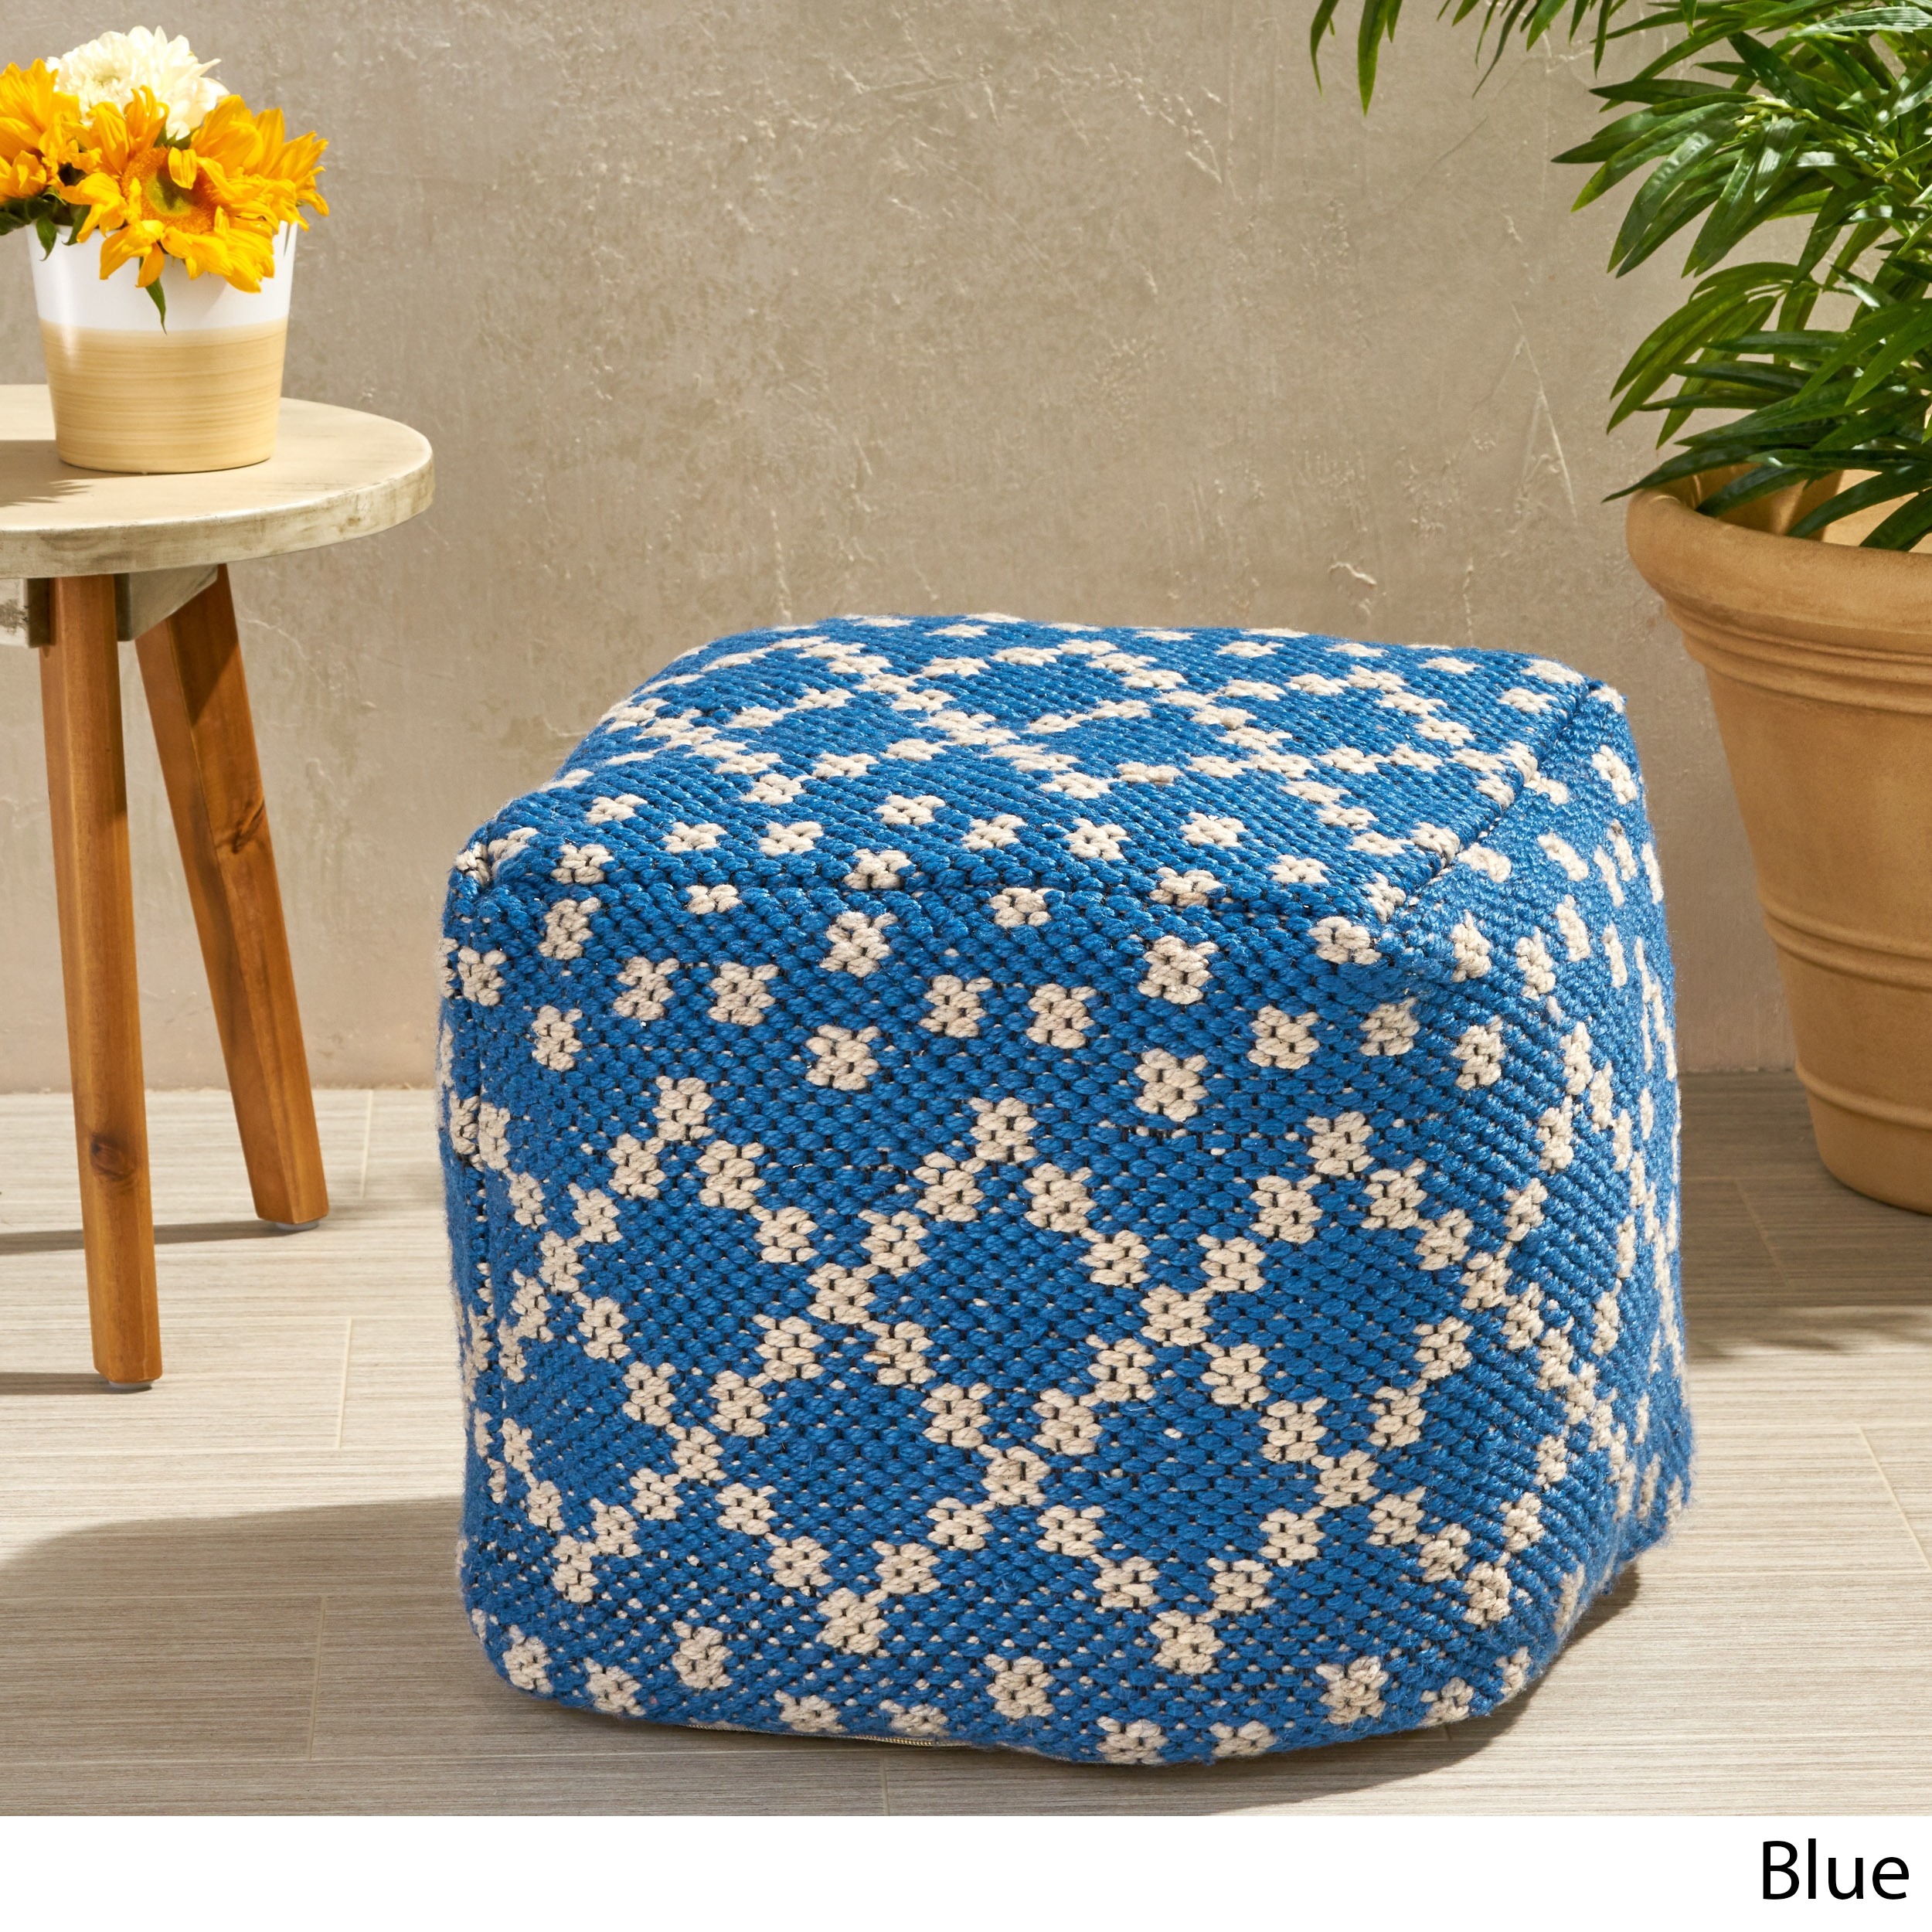 Ophelia Outdoor Handcrafted Boho Fabric Cube Pouf, Blue and White - image 1 of 6